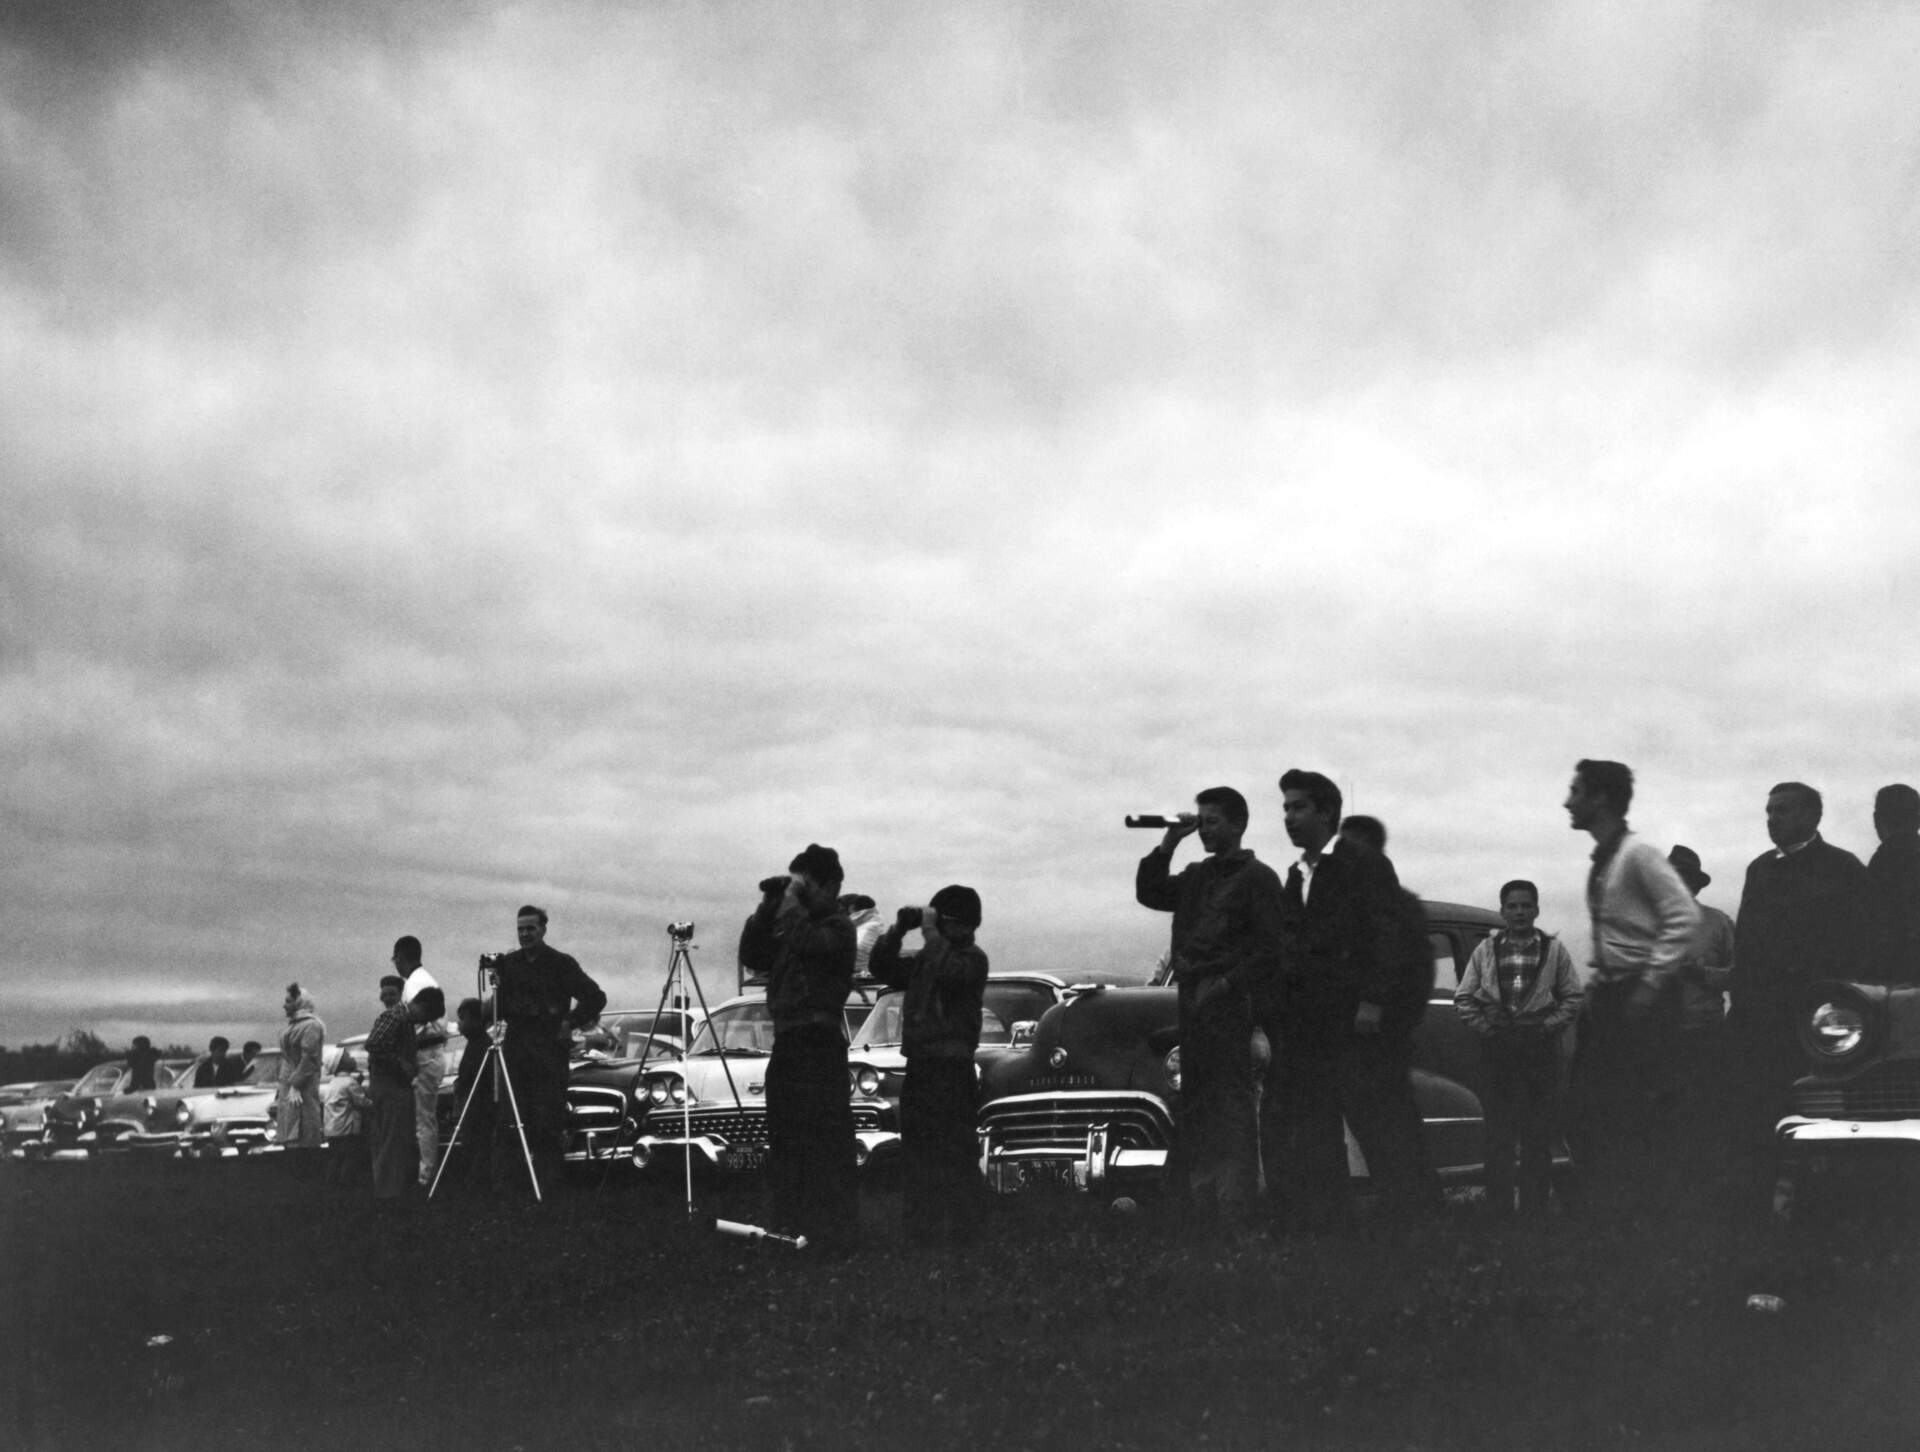 People watching a total eclipse of the sun that reached totality at sunrise in the Boston area, Worcester, Massachusetts, Oct. 2, 1959. (Underwood Archives/Getty Images)